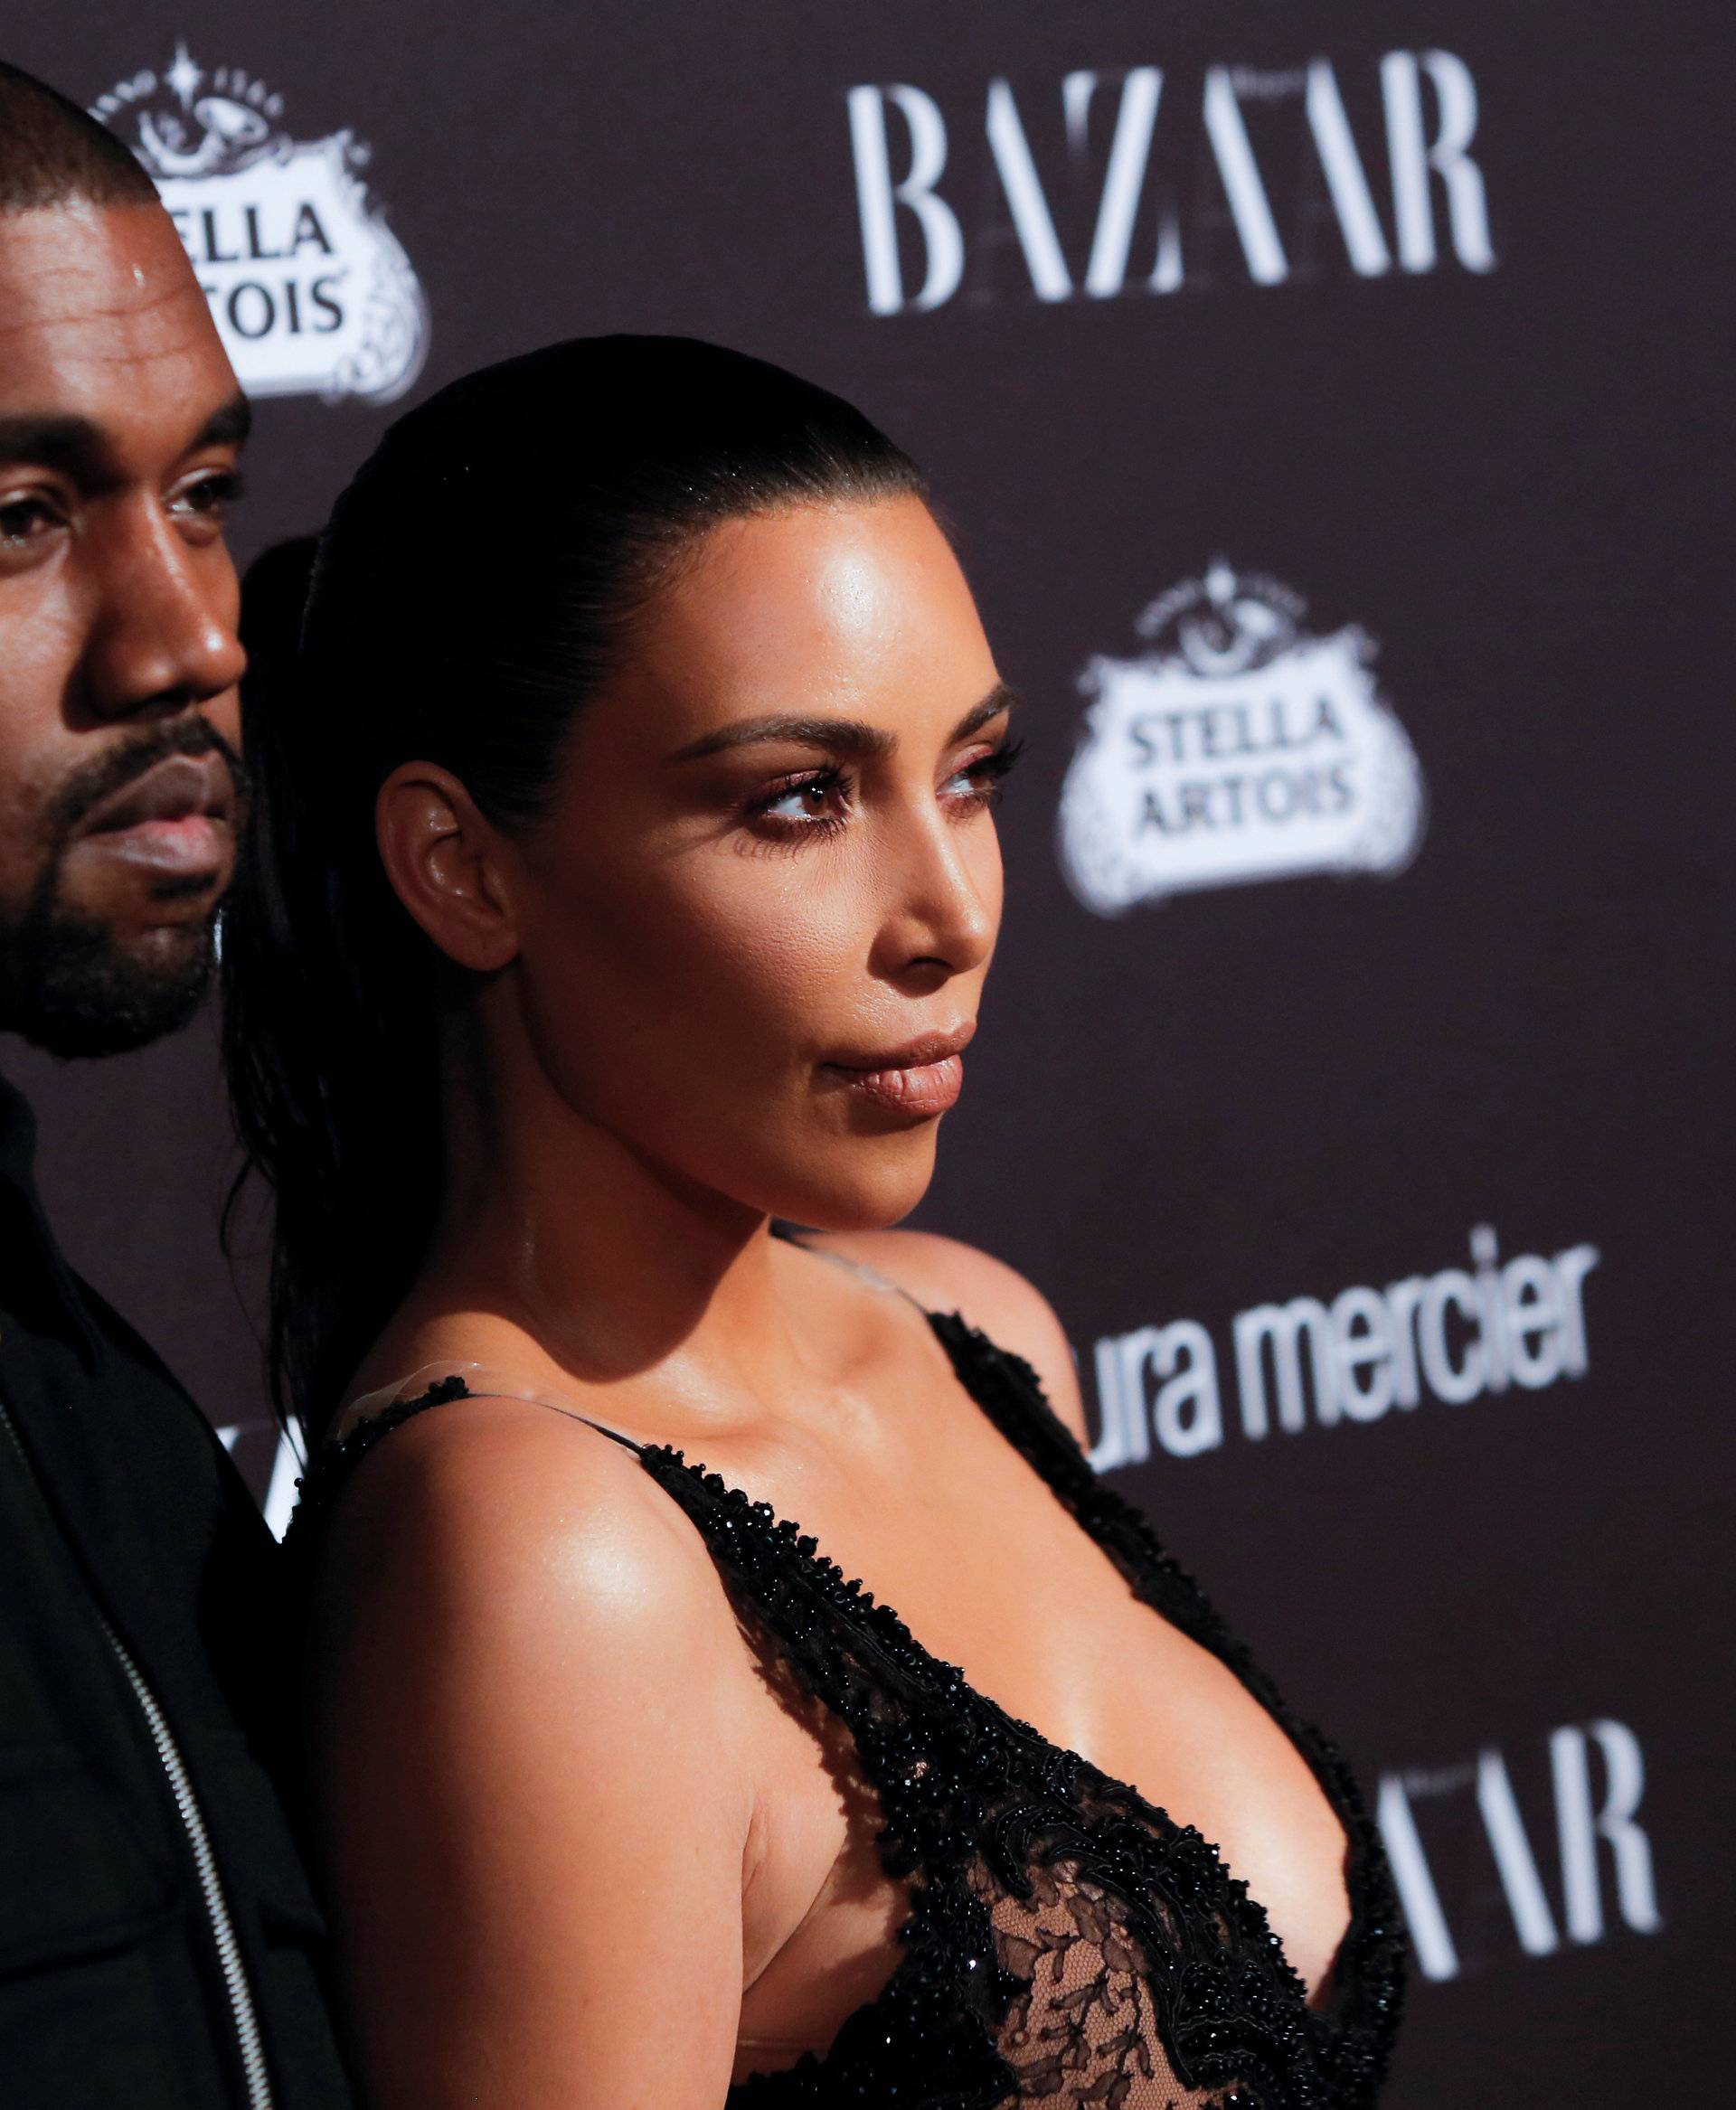 Kanye West and Kim Kardashian attend Harper's Bazaar's celebration of 'ICONS By Carine Roitfeld' at The Plaza Hotel during New York Fashion Week in Manhattan, New York, U.S.